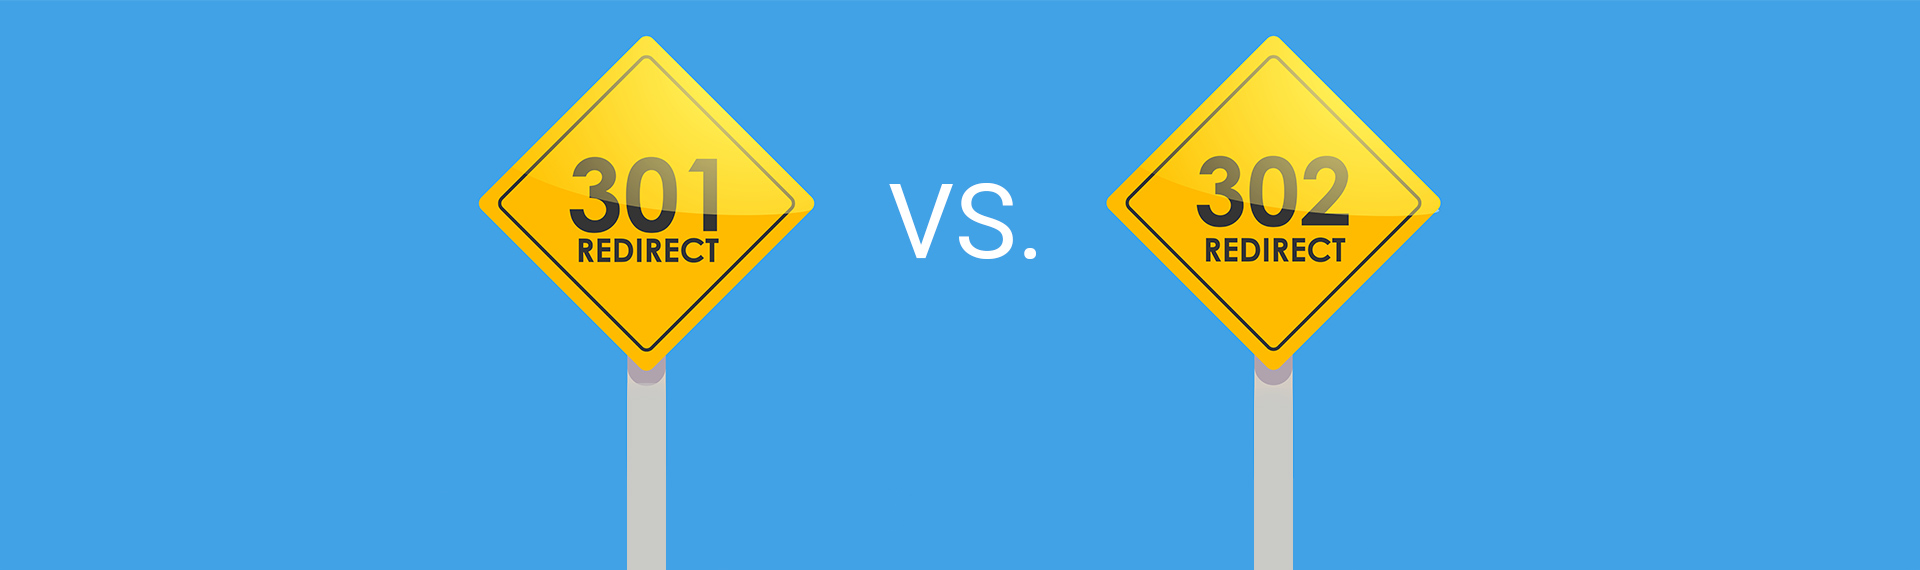 301 vs. 302 Redirects: Which is Better for SEO